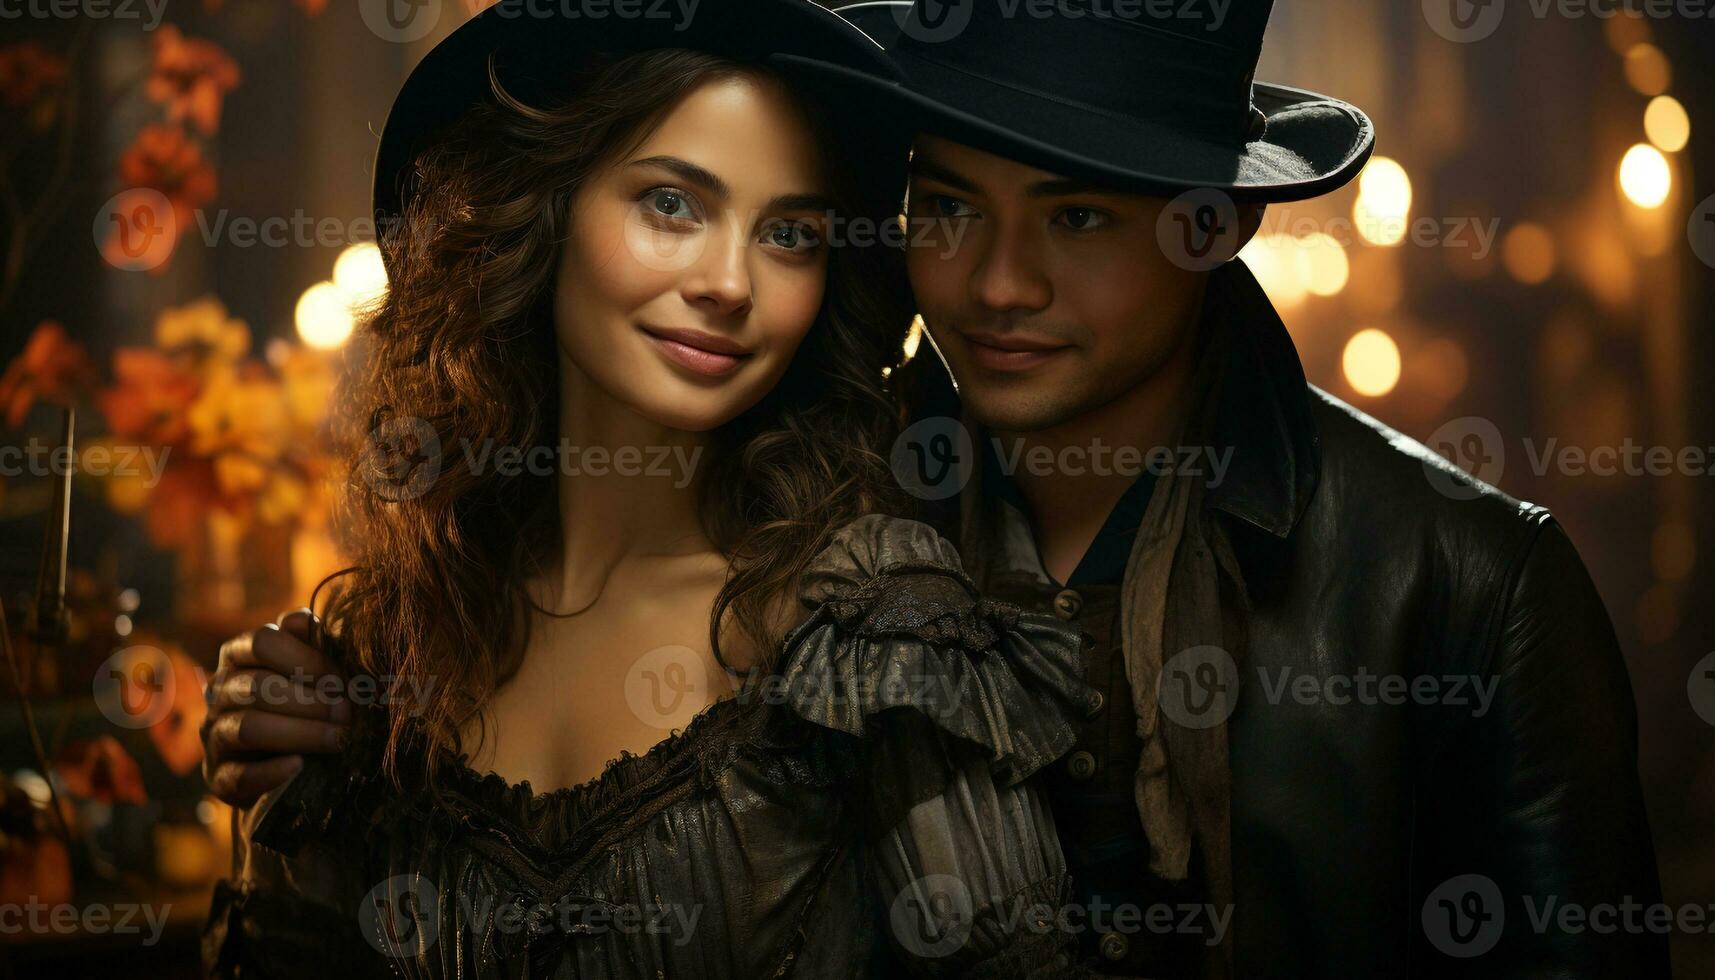 Young couple embracing, smiling, celebrating love at a Halloween party generated by AI photo